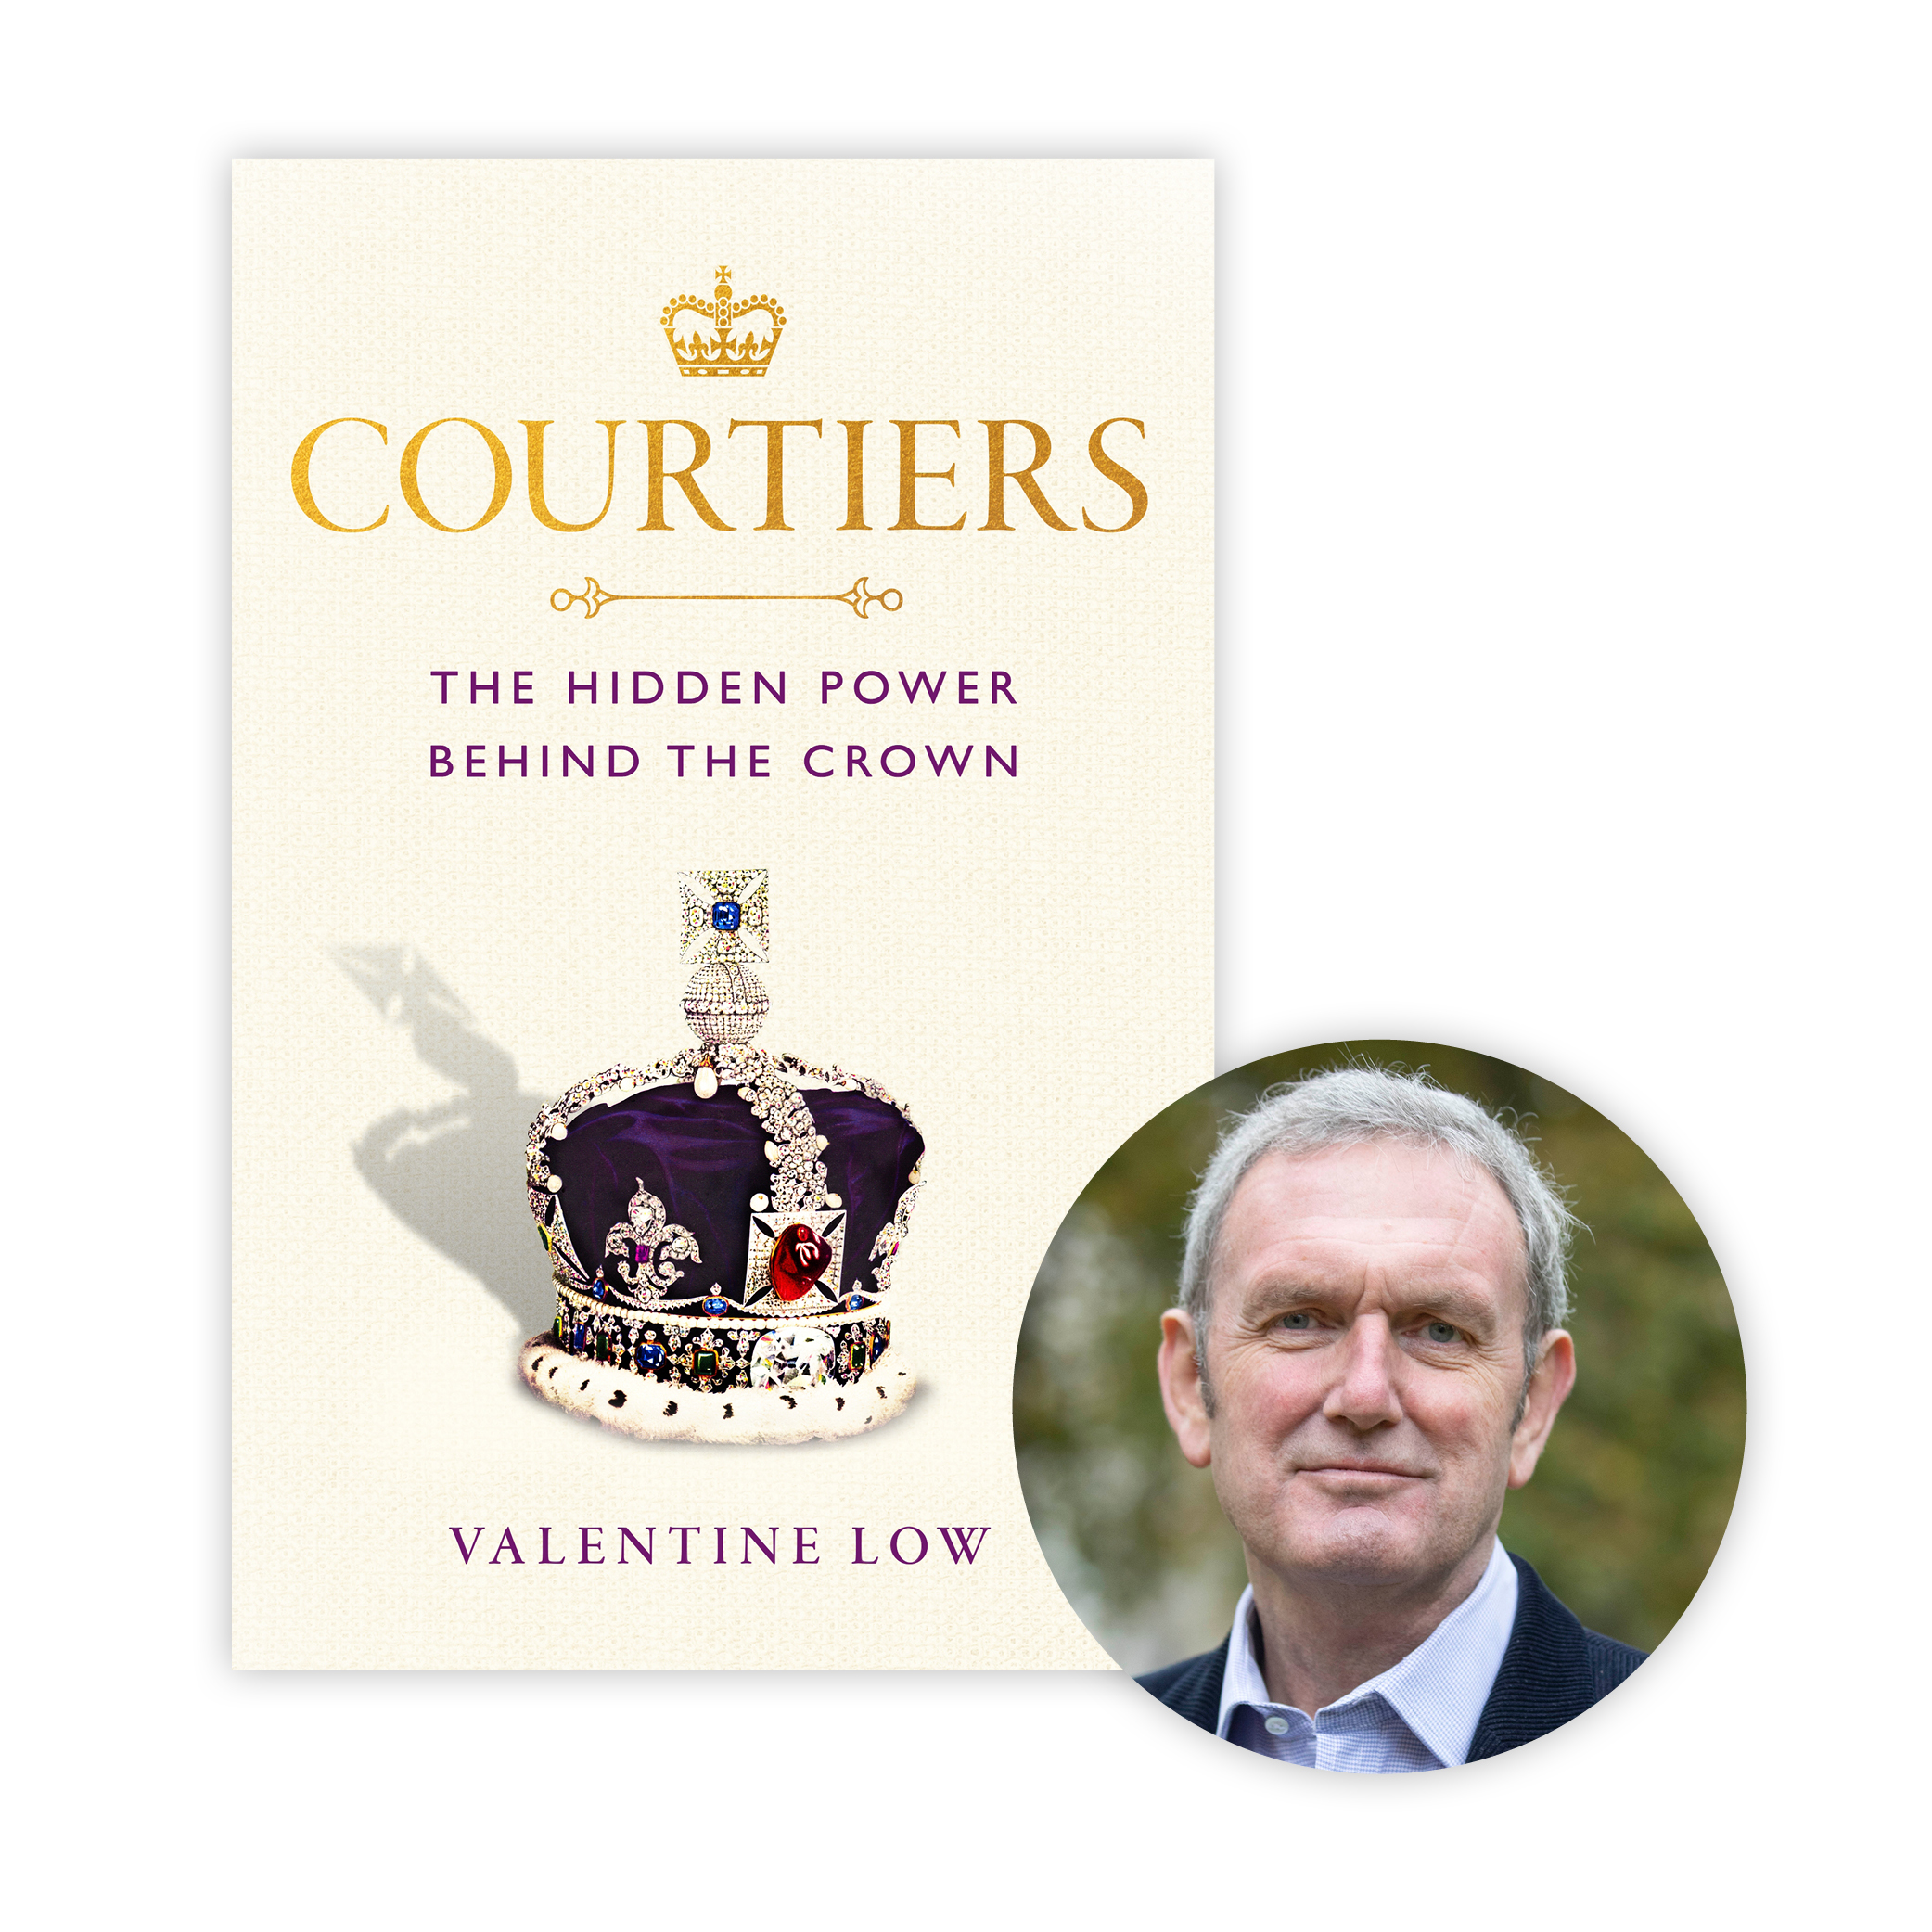 Courtiers by Valentine Low Best Book for Royalists